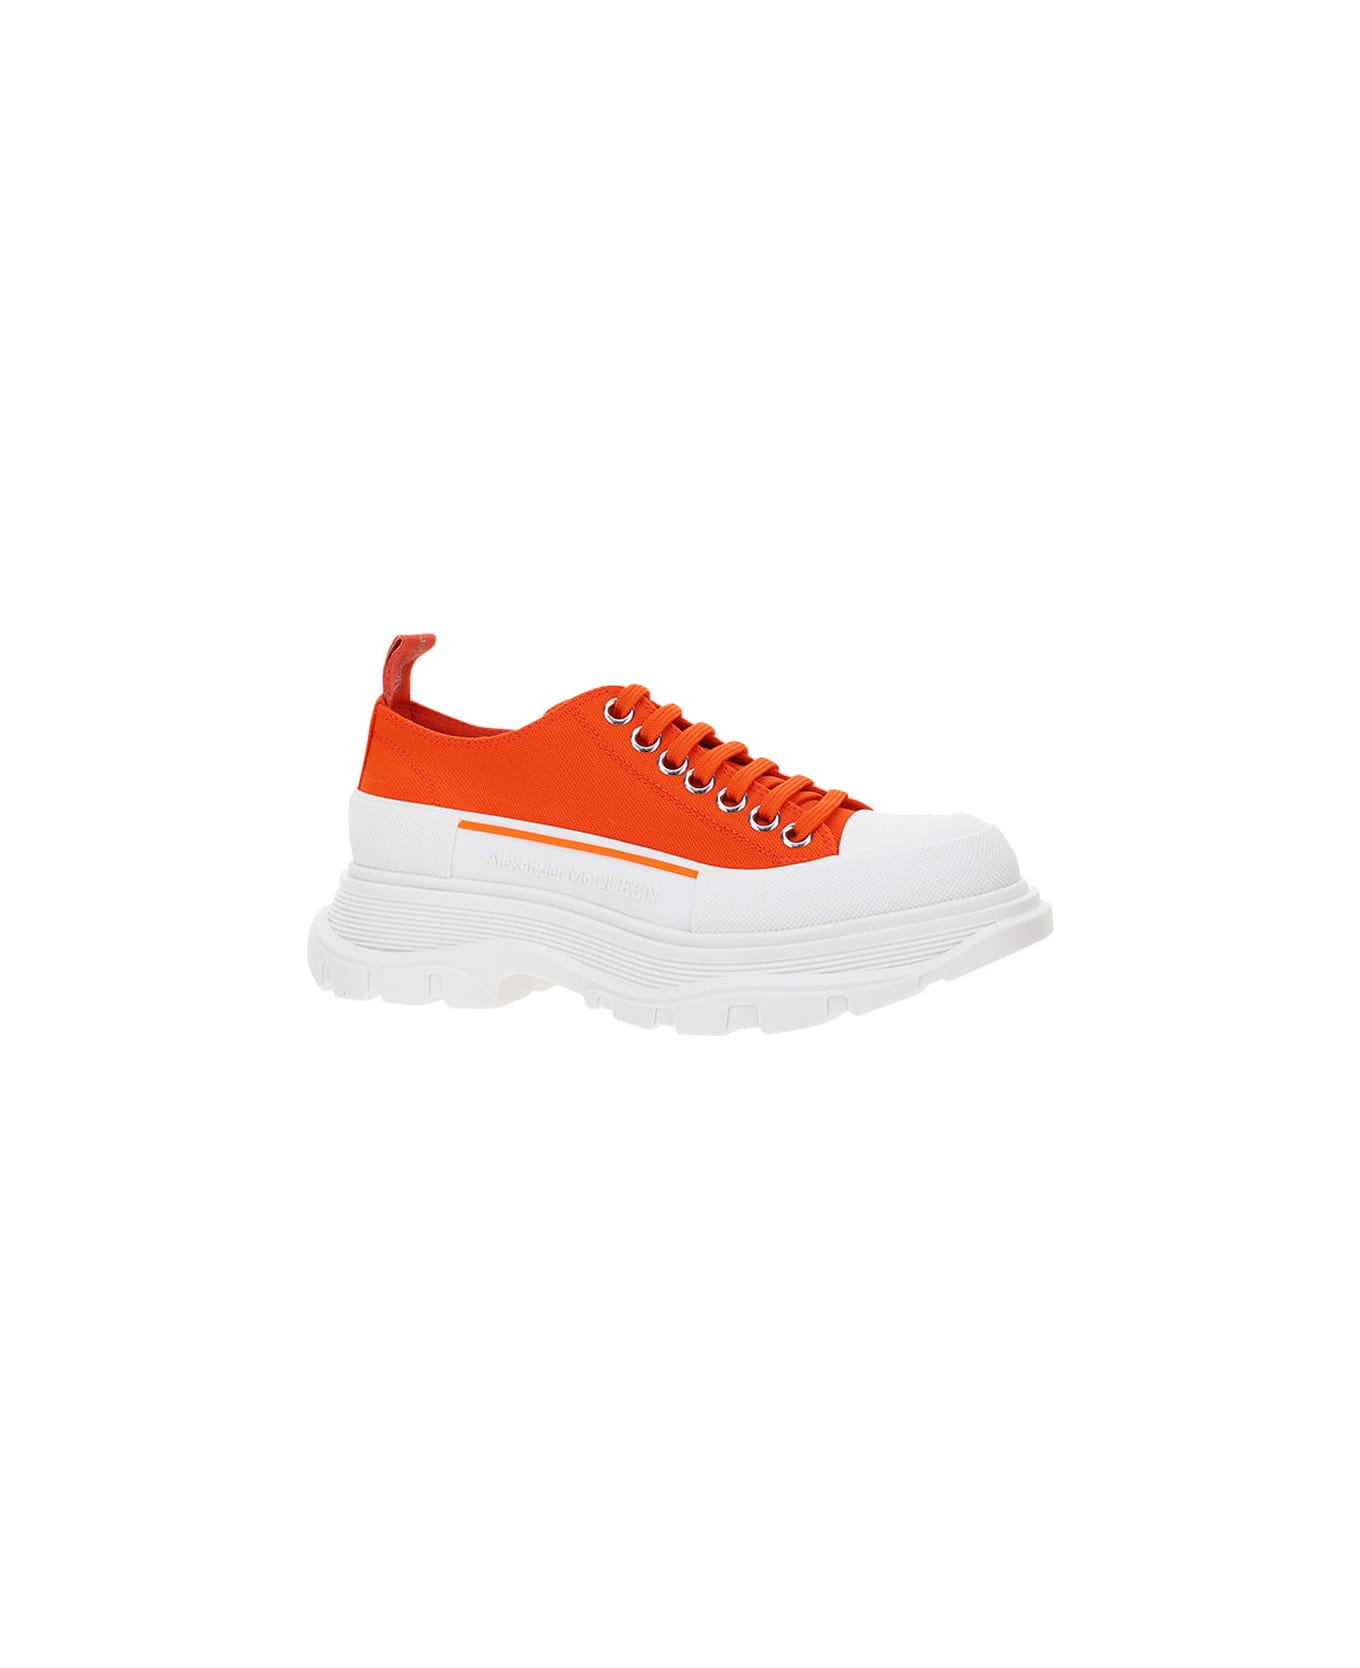 Alexander McQueen Tread Slick Sneakers - Lu.or/of.wh/l.o./si ウェッジシューズ